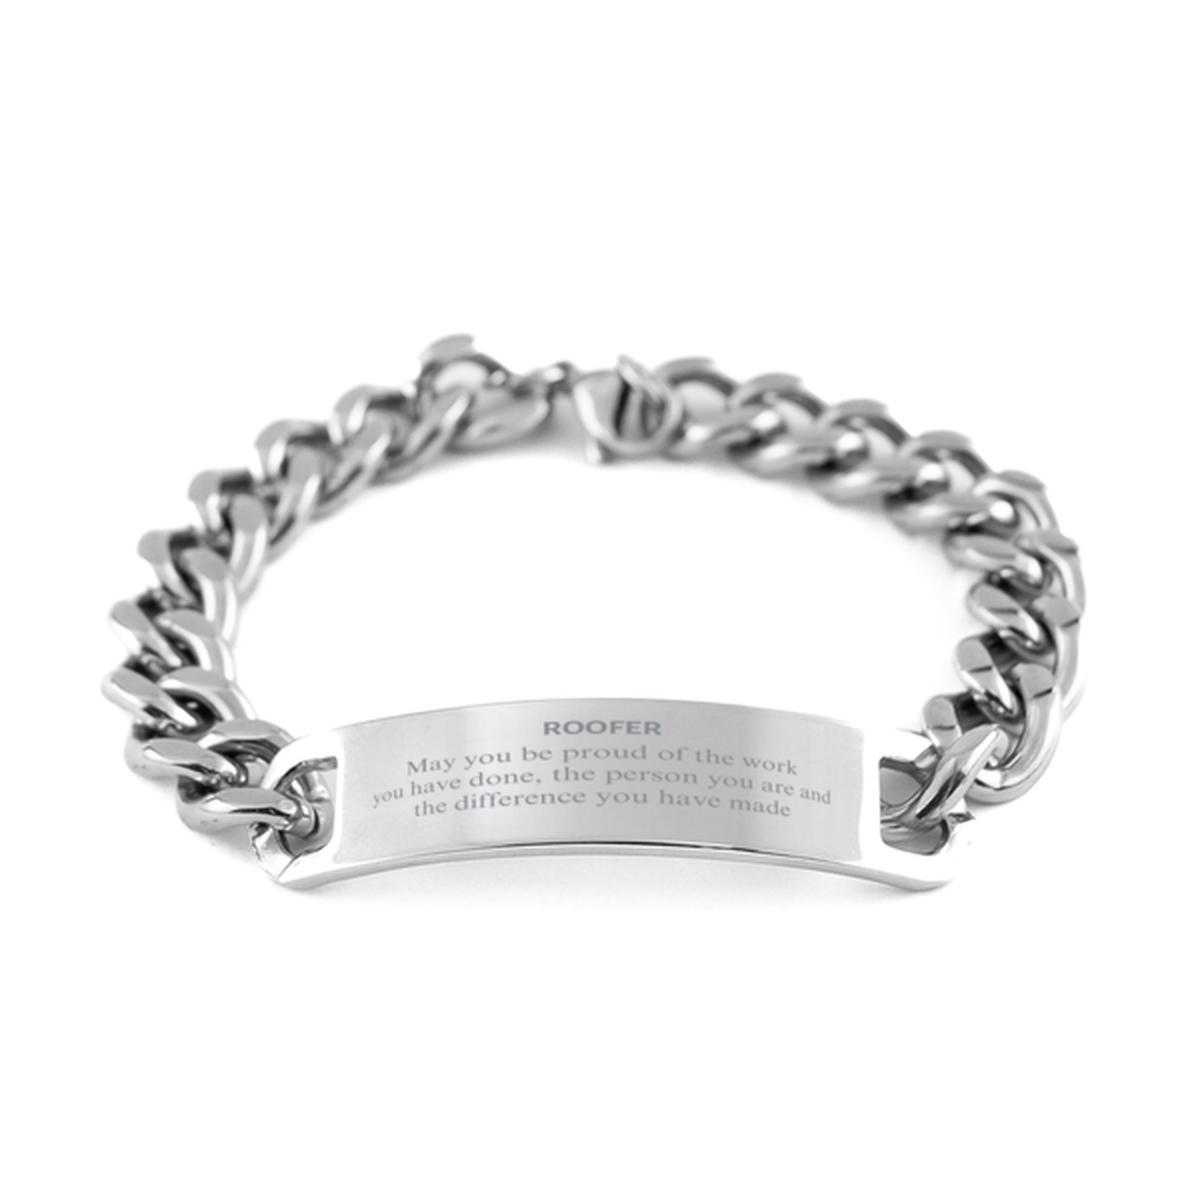 Roofer May you be proud of the work you have done, Retirement Roofer Cuban Chain Stainless Steel Bracelet for Colleague Appreciation Gifts Amazing for Roofer